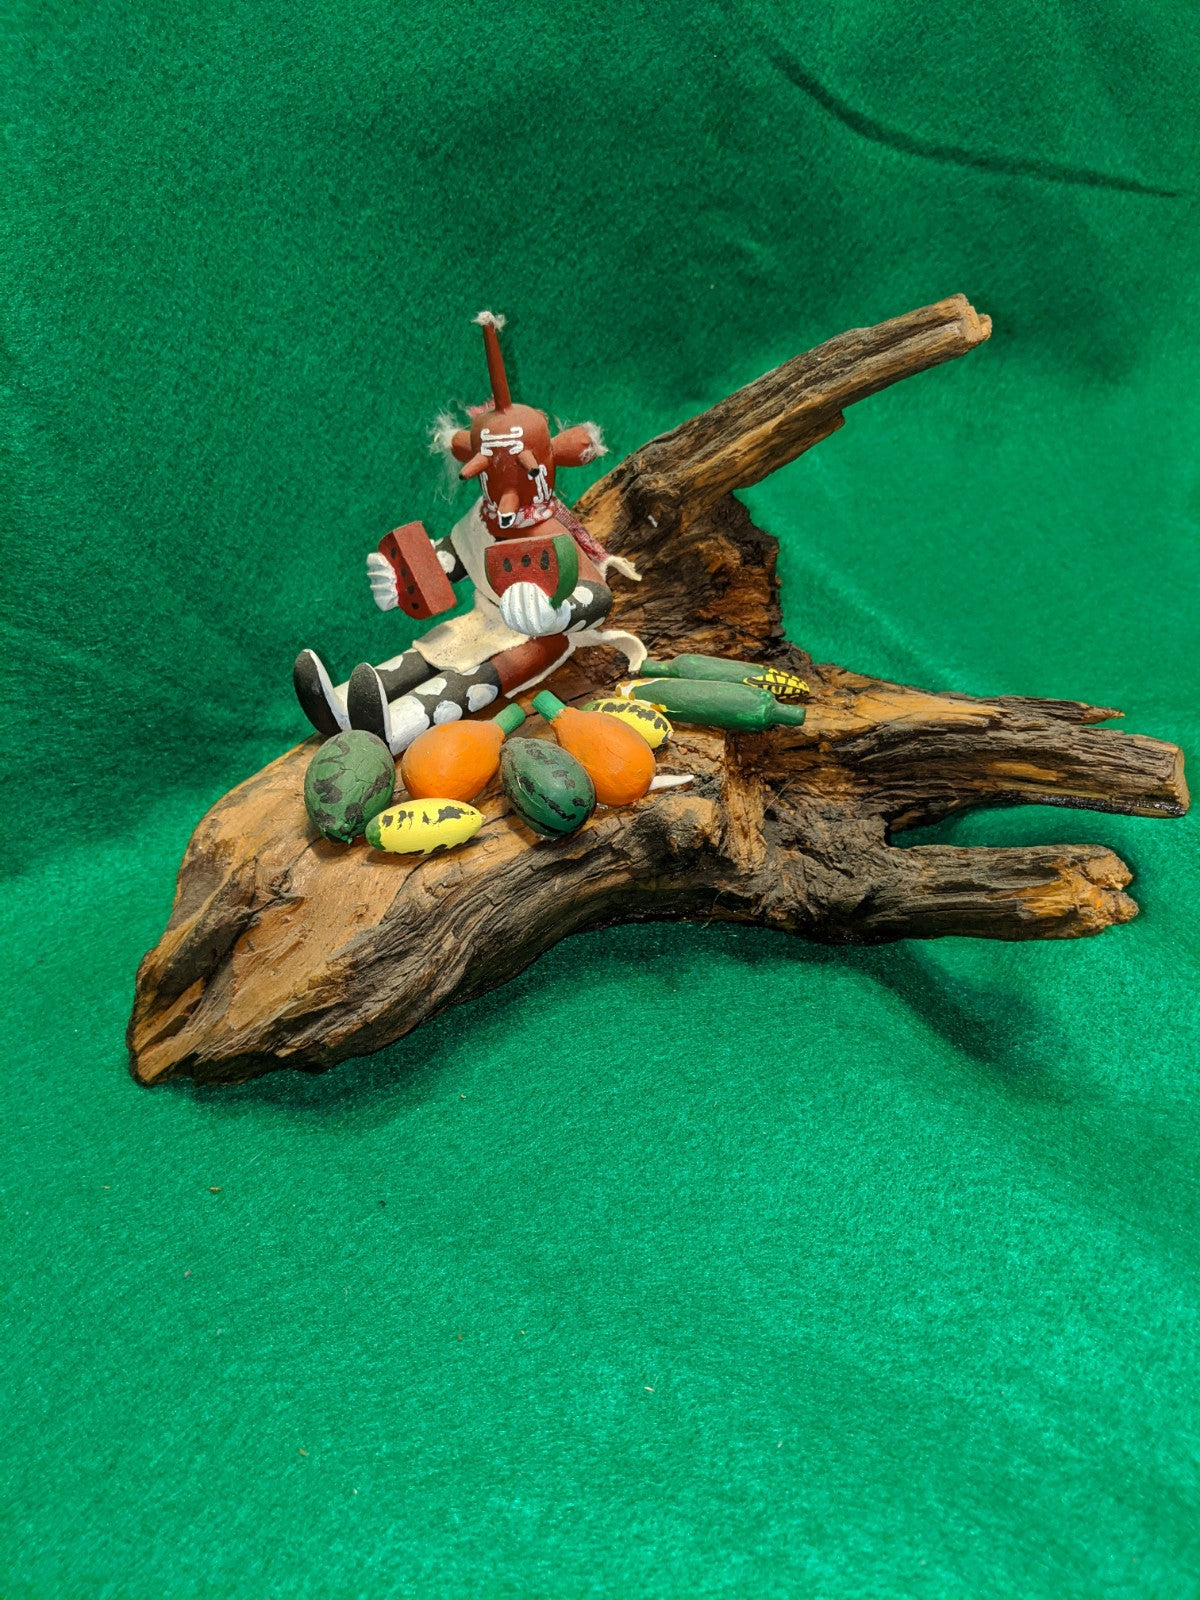 Kachina Clown with Gourds, Corn and Mellons